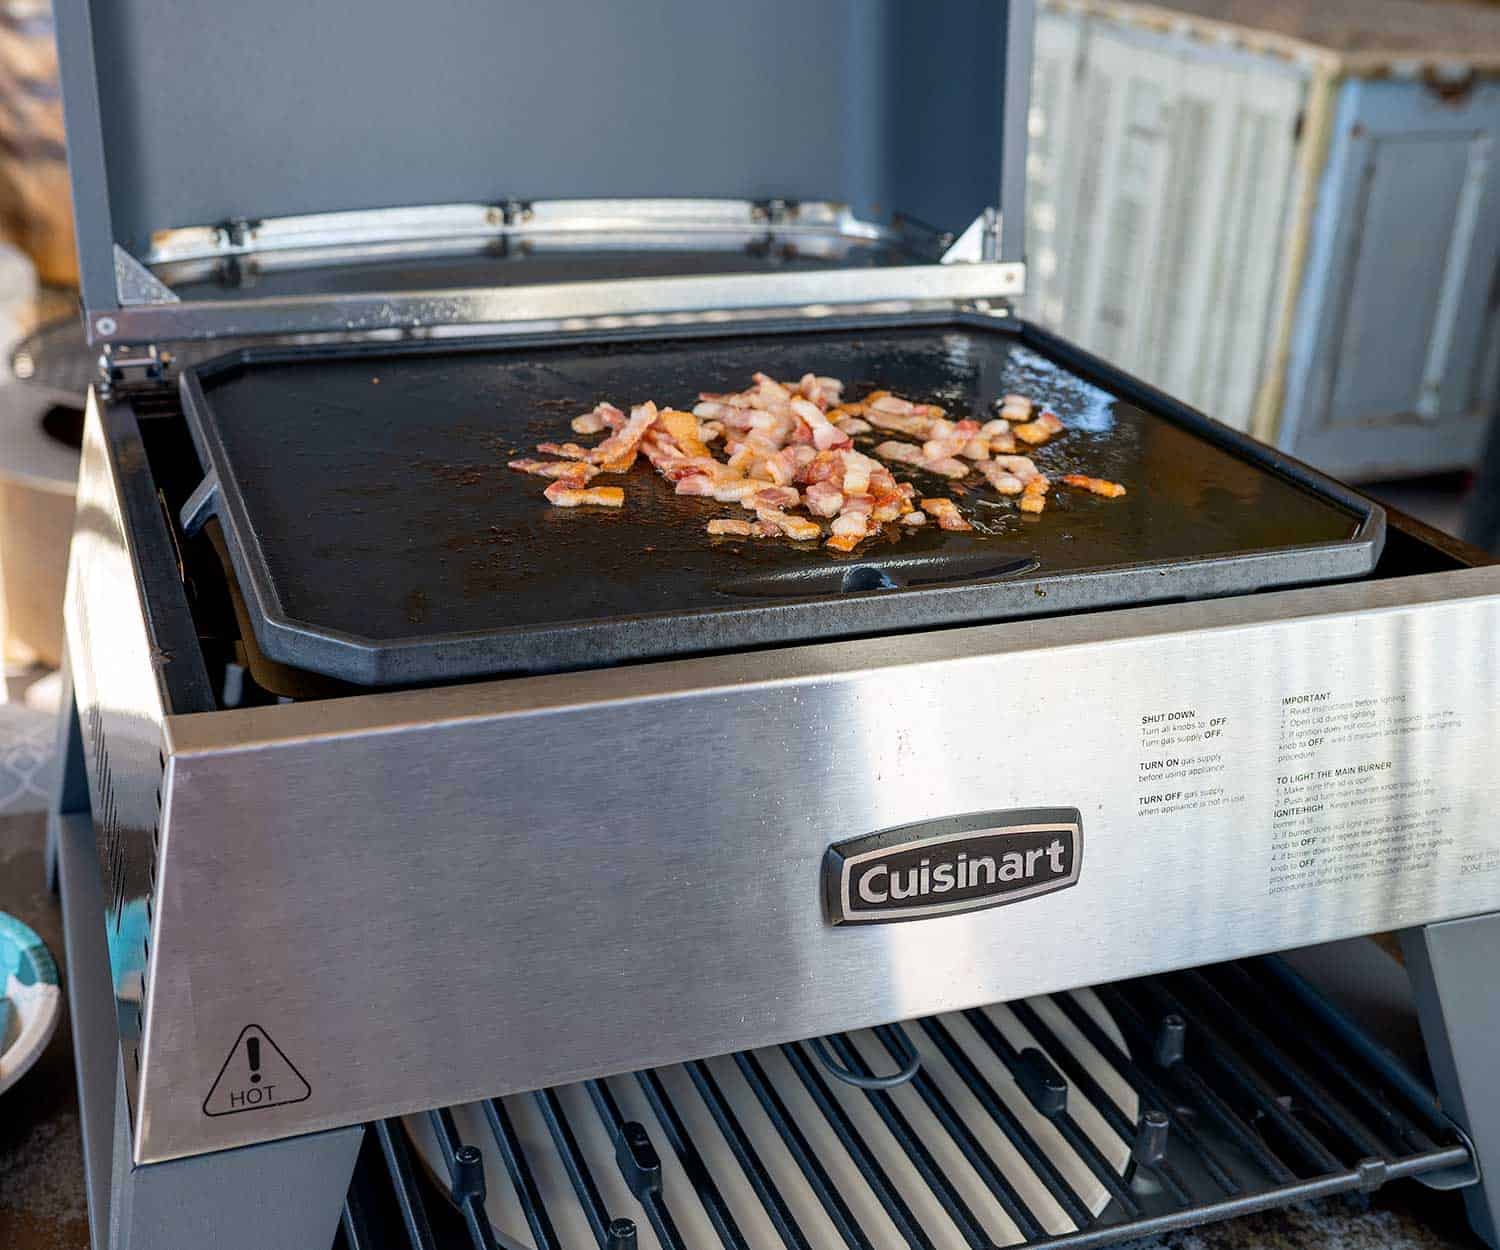 Cuisinart 3-in-1 Pizza Oven Plus griddle with bacon.